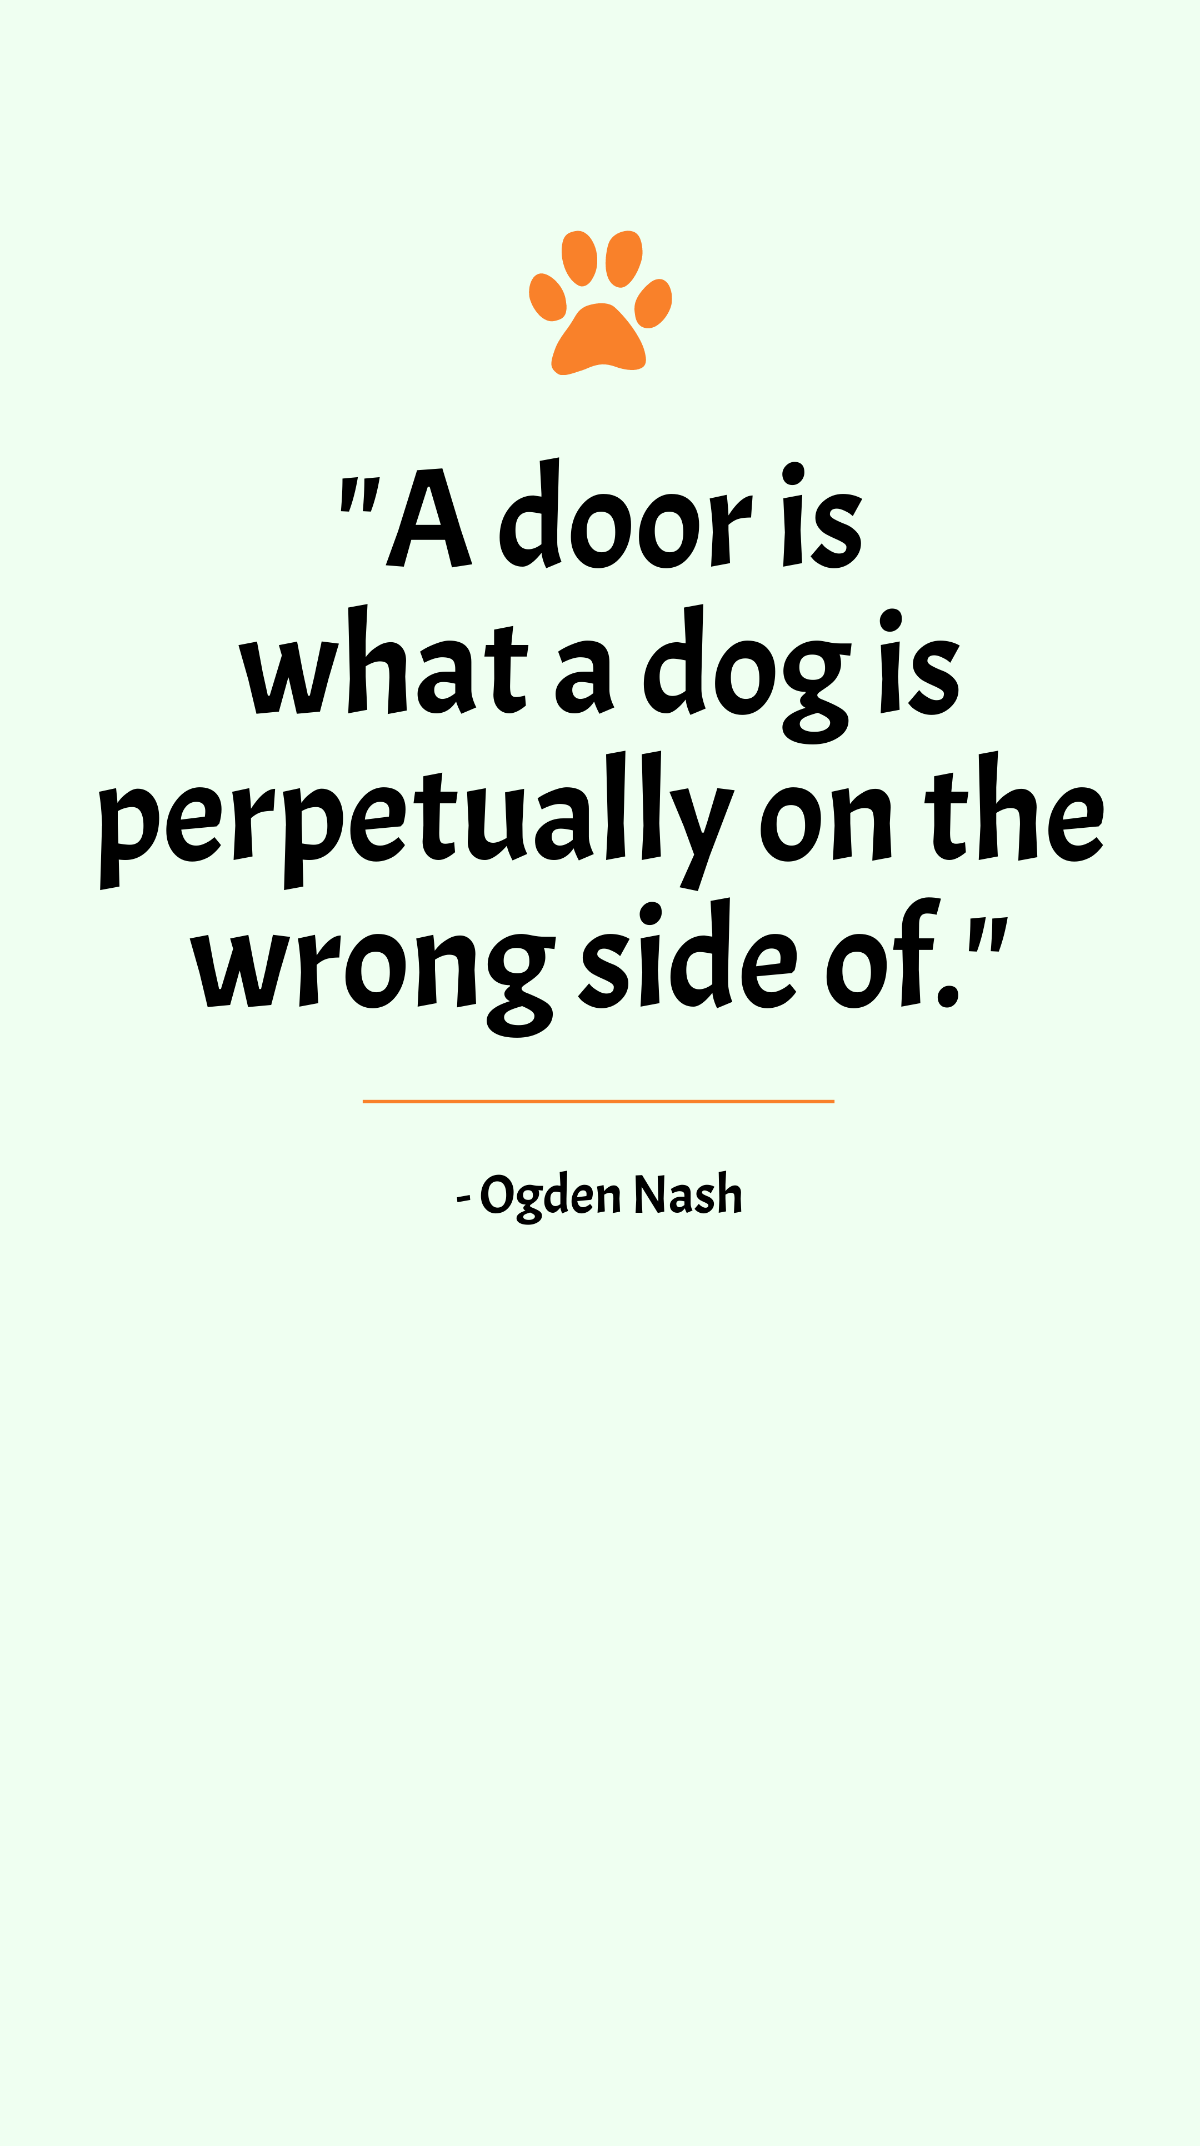 Ogden Nash - A door is what a dog is perpetually on the wrong side of. Template